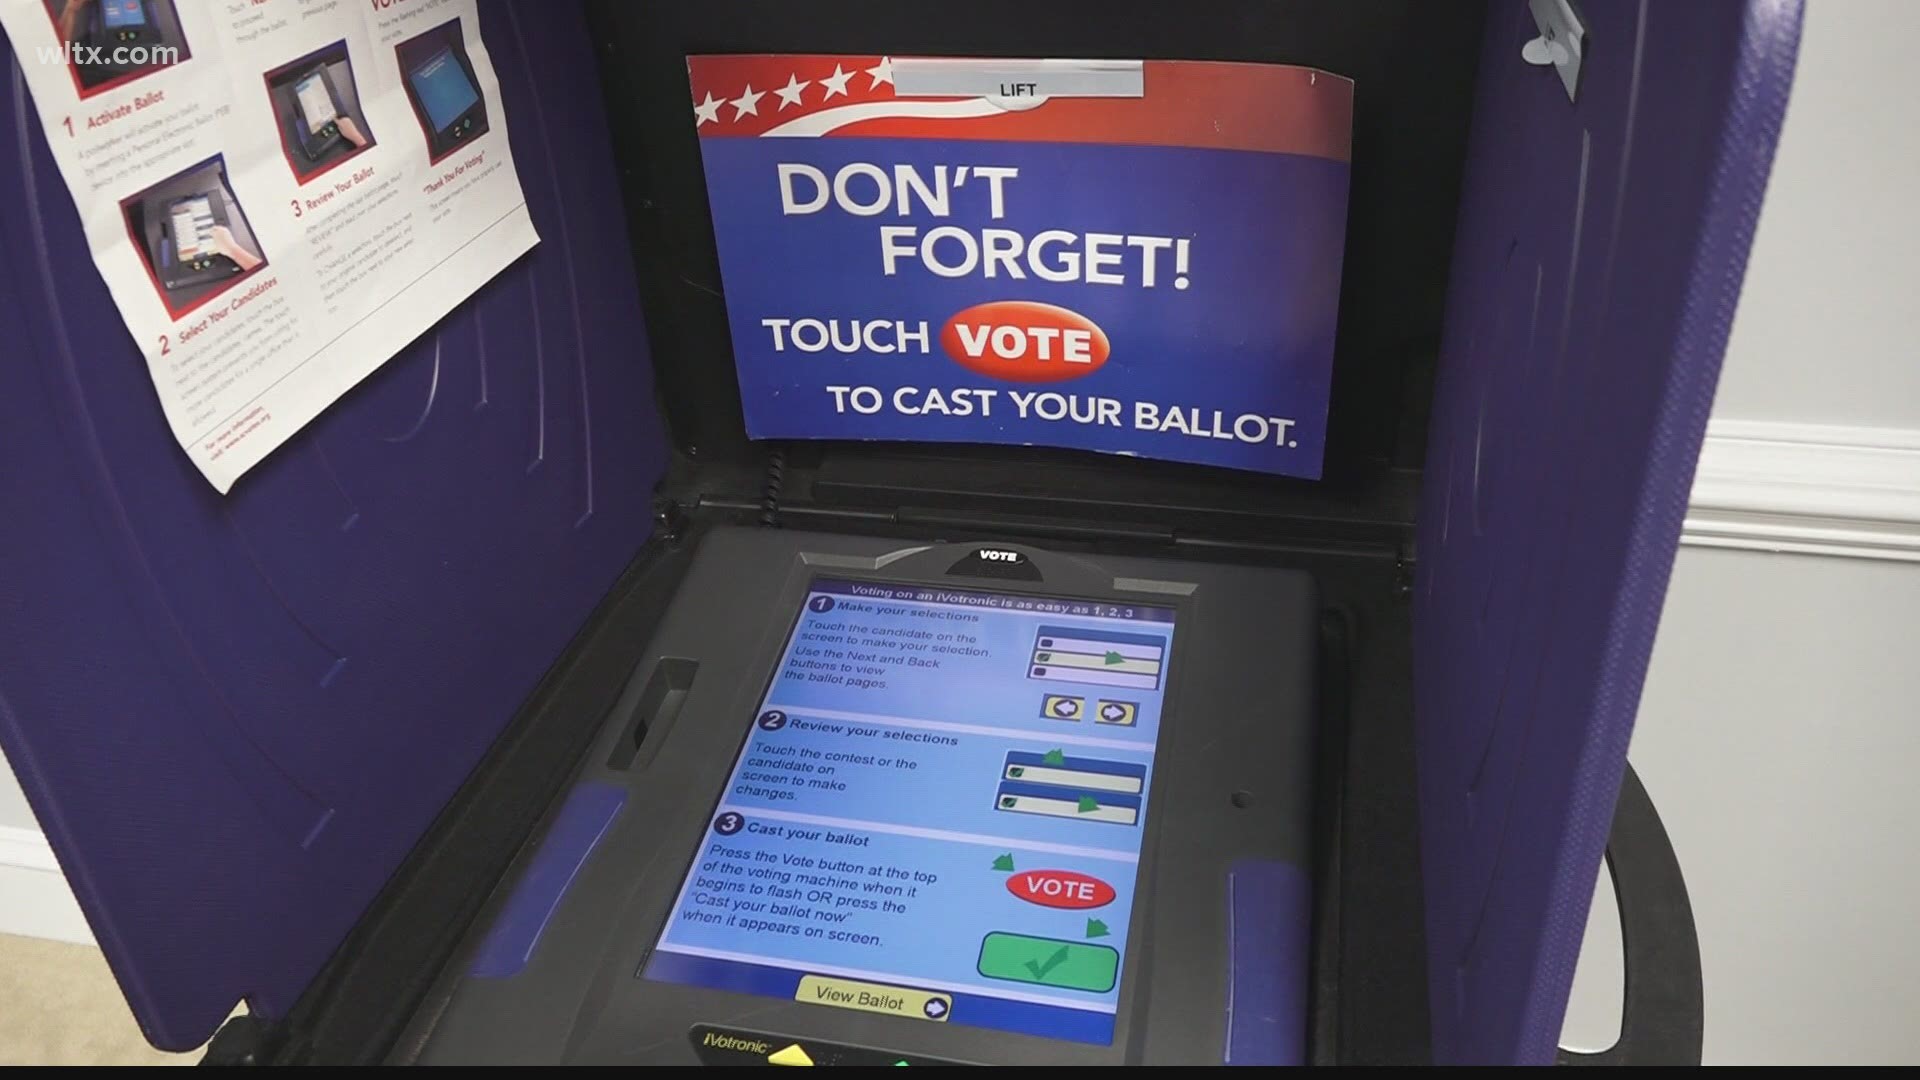 Voters in South Carolina are not allowed to take a picture of their ballot and share it with others.